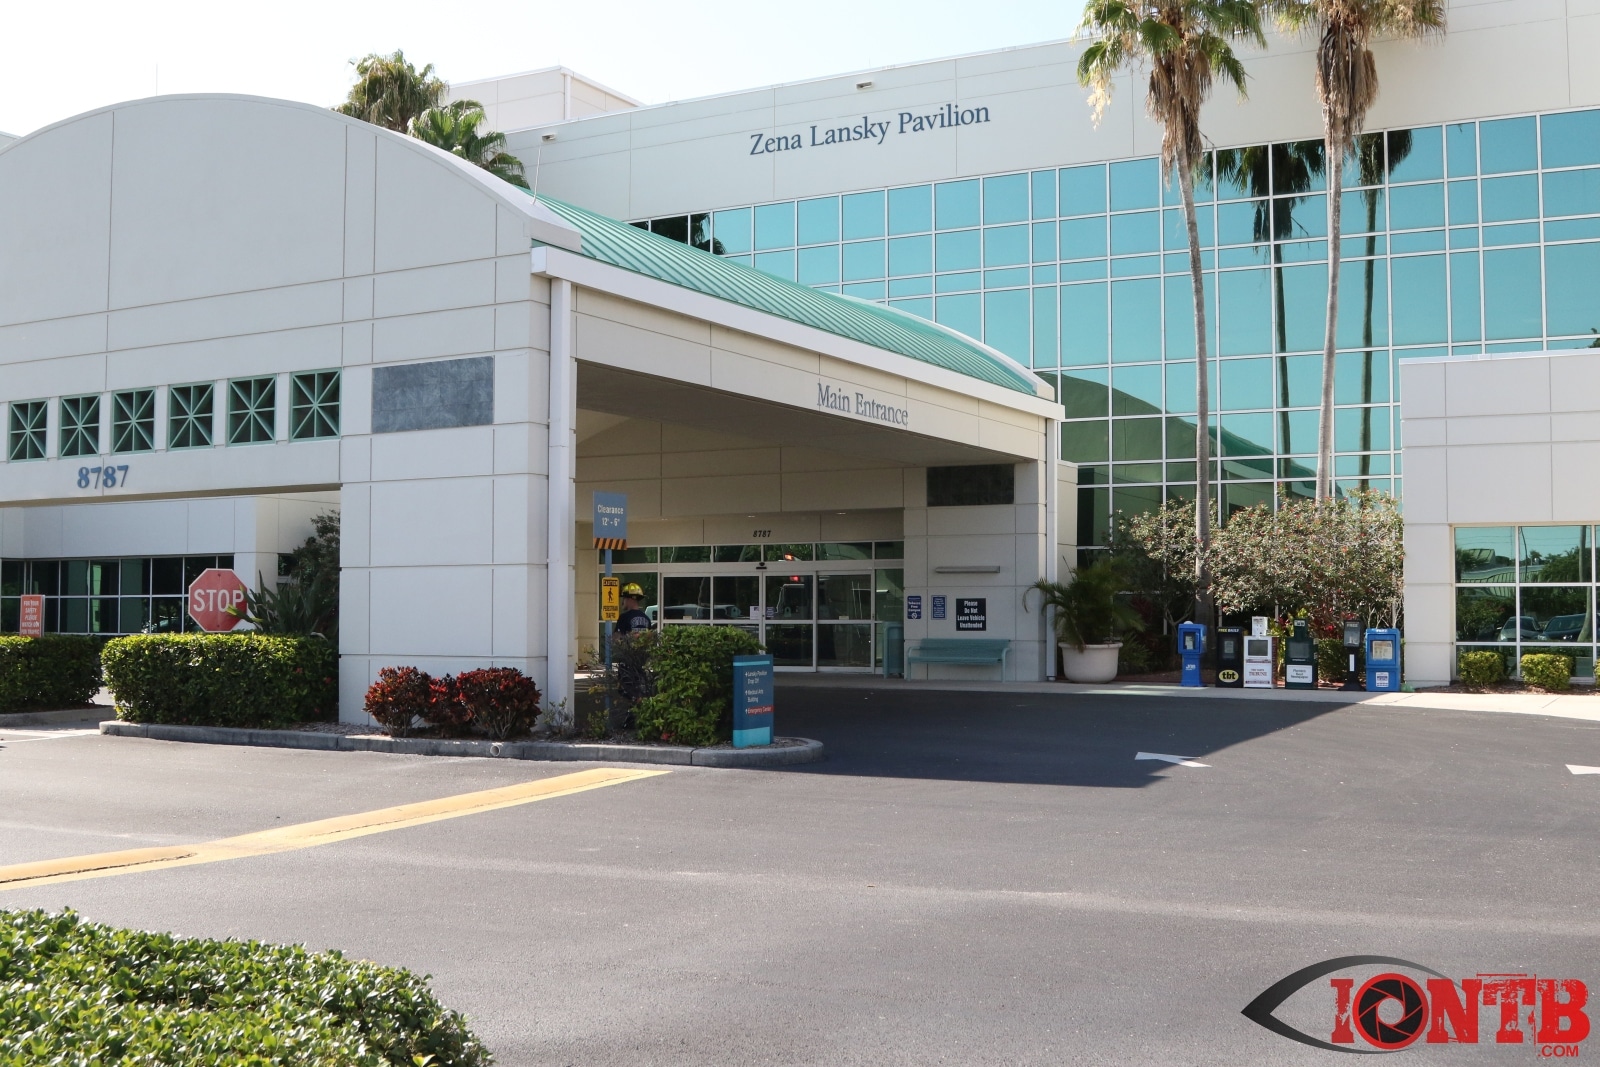 Malfunctioning Fire Sprinkler May Impact Services At Bardmoor Outpatient Center on Wednesday